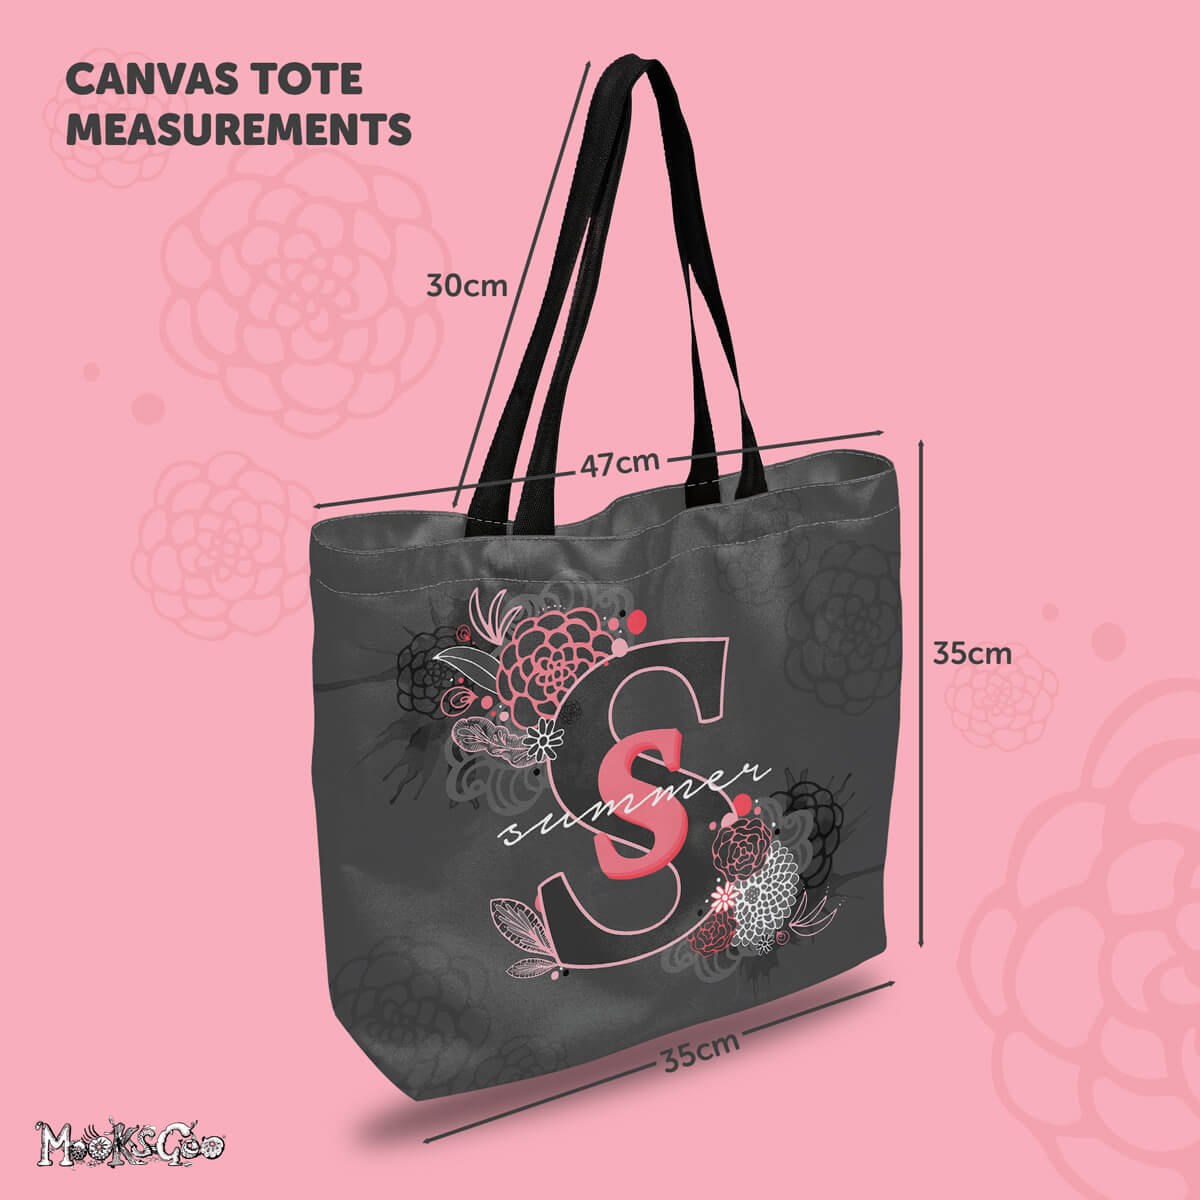 Tote bag measurements for a personalised name, designed by MooksGoo